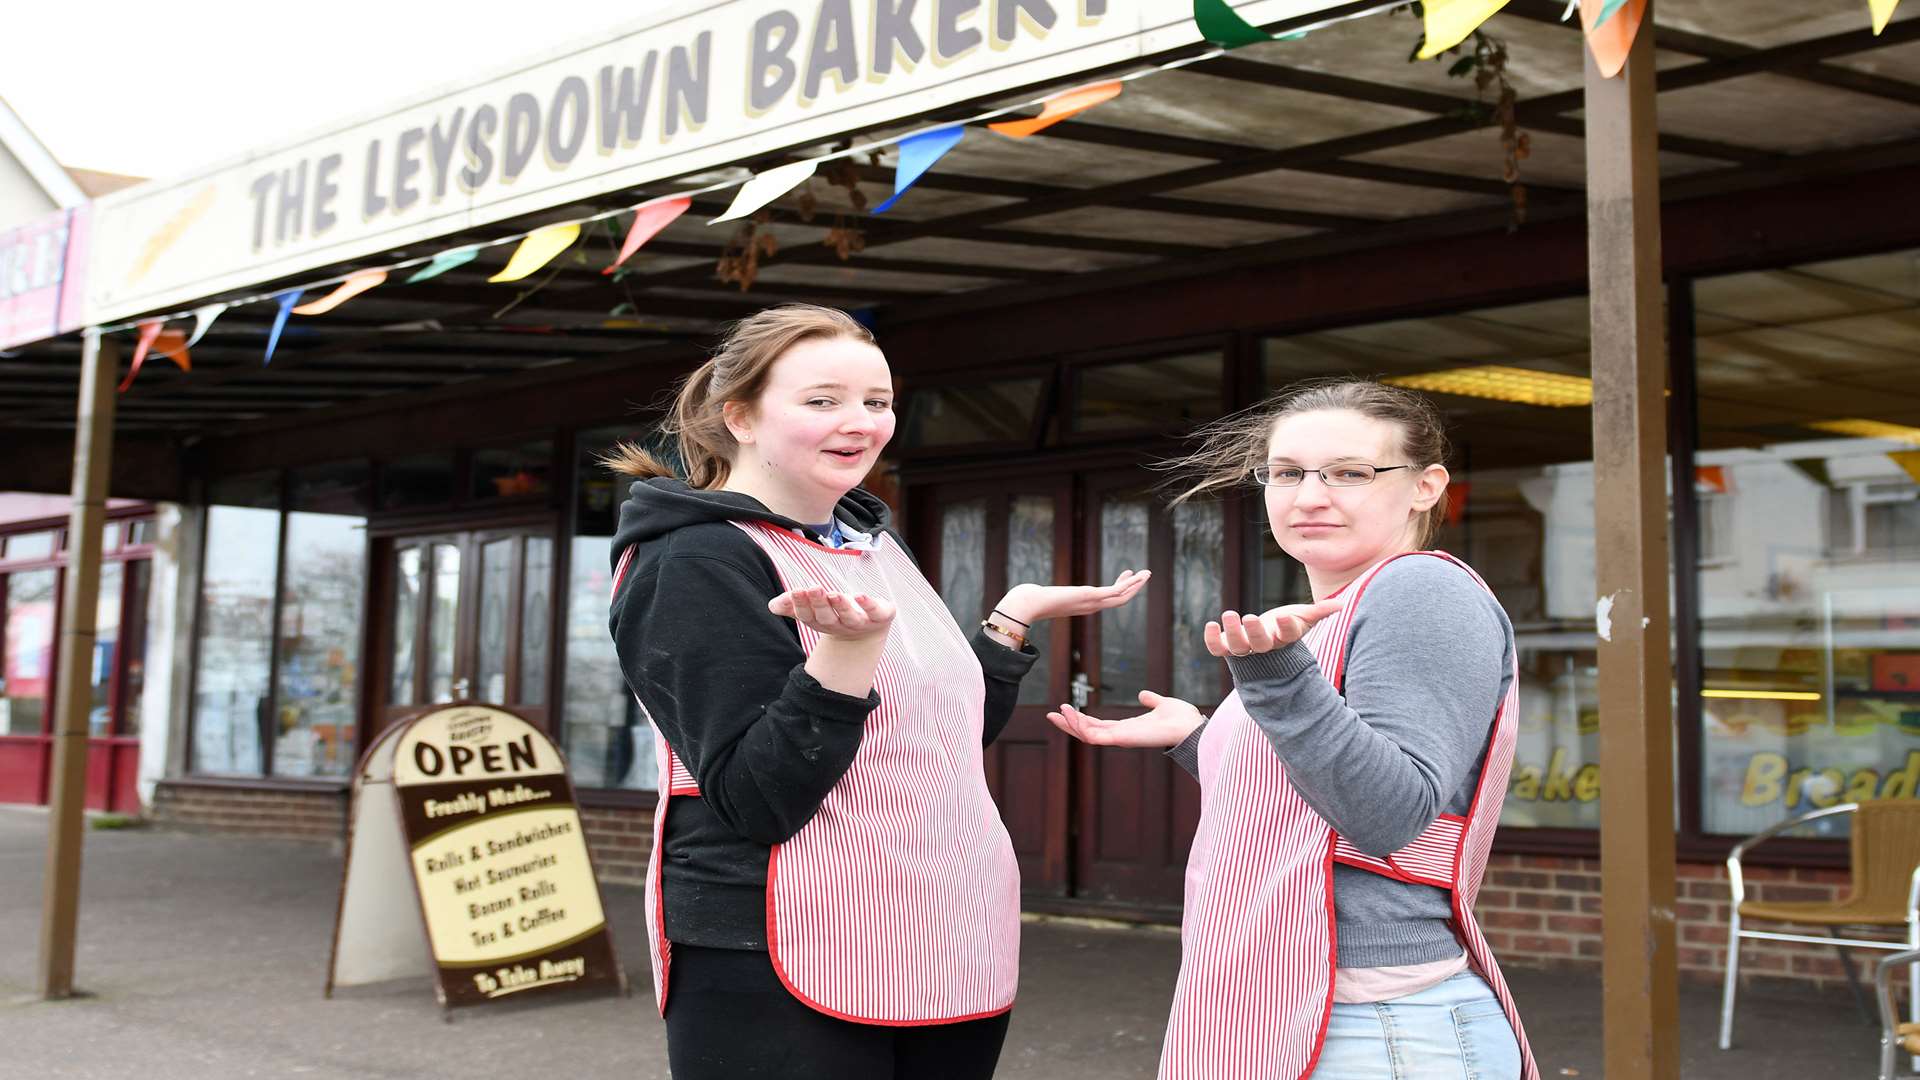 At Leysdown Bakery two doors down from the bookies, Rachael Fagg, 21, and her colleague Amy Sosbe, 29, remained mystified. Picture: stevefinnphotography@yahoo.co.uk